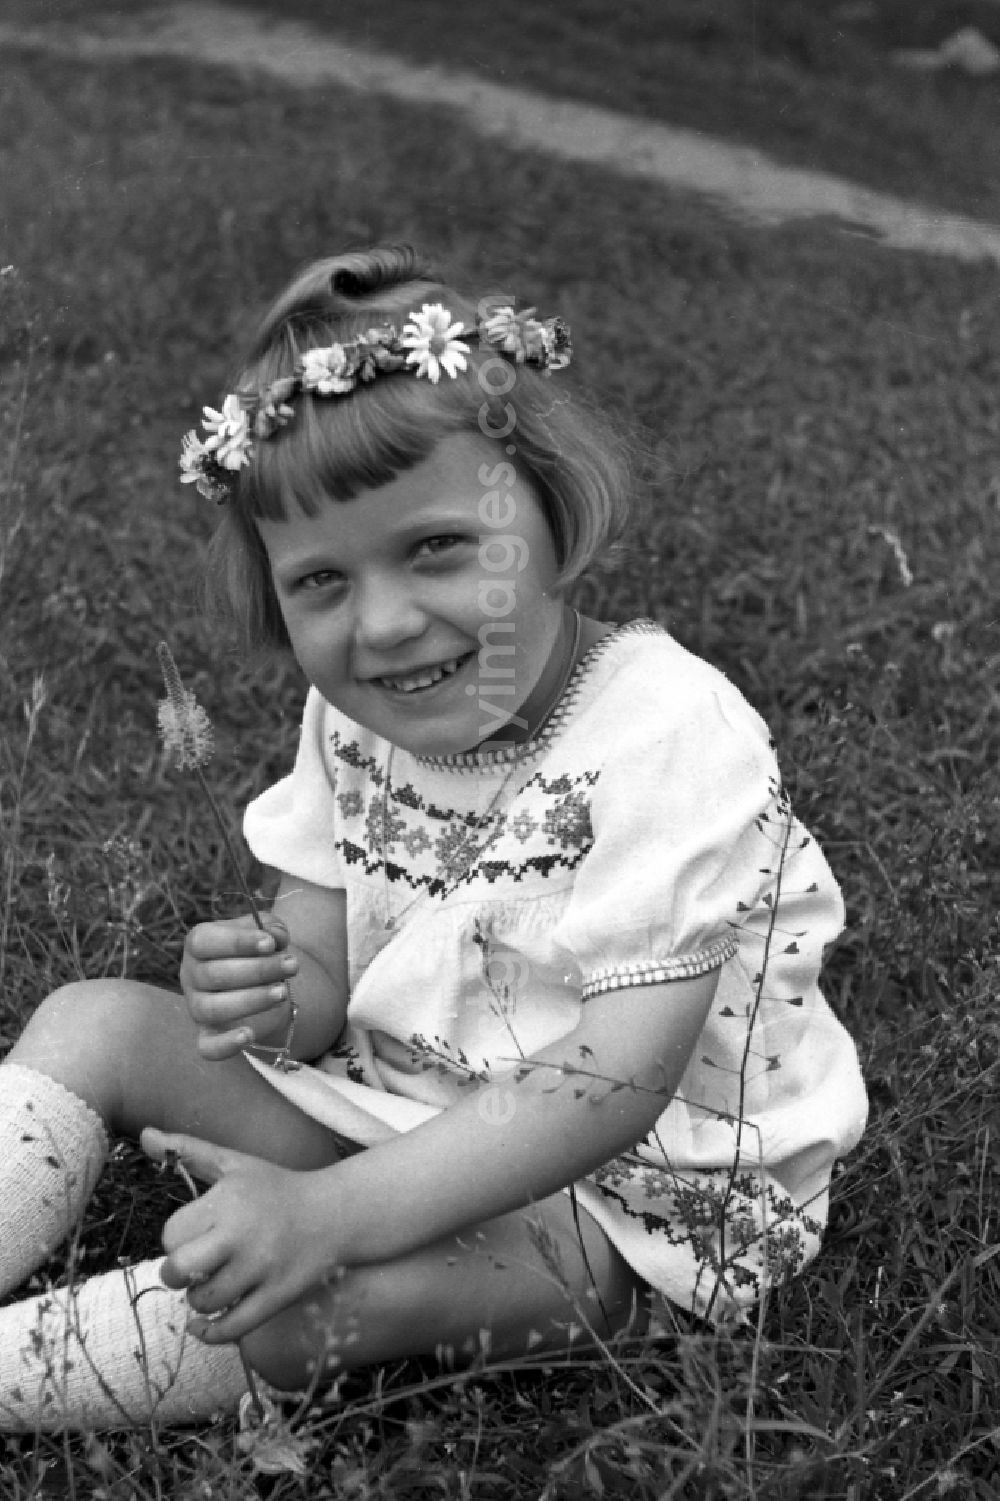 GDR image archive: Bansin - A small girl with floral wreath sits on a meadow in Bansin in the federal state Mecklenburg-West Pomerania in the area of the former GDR, German democratic republic